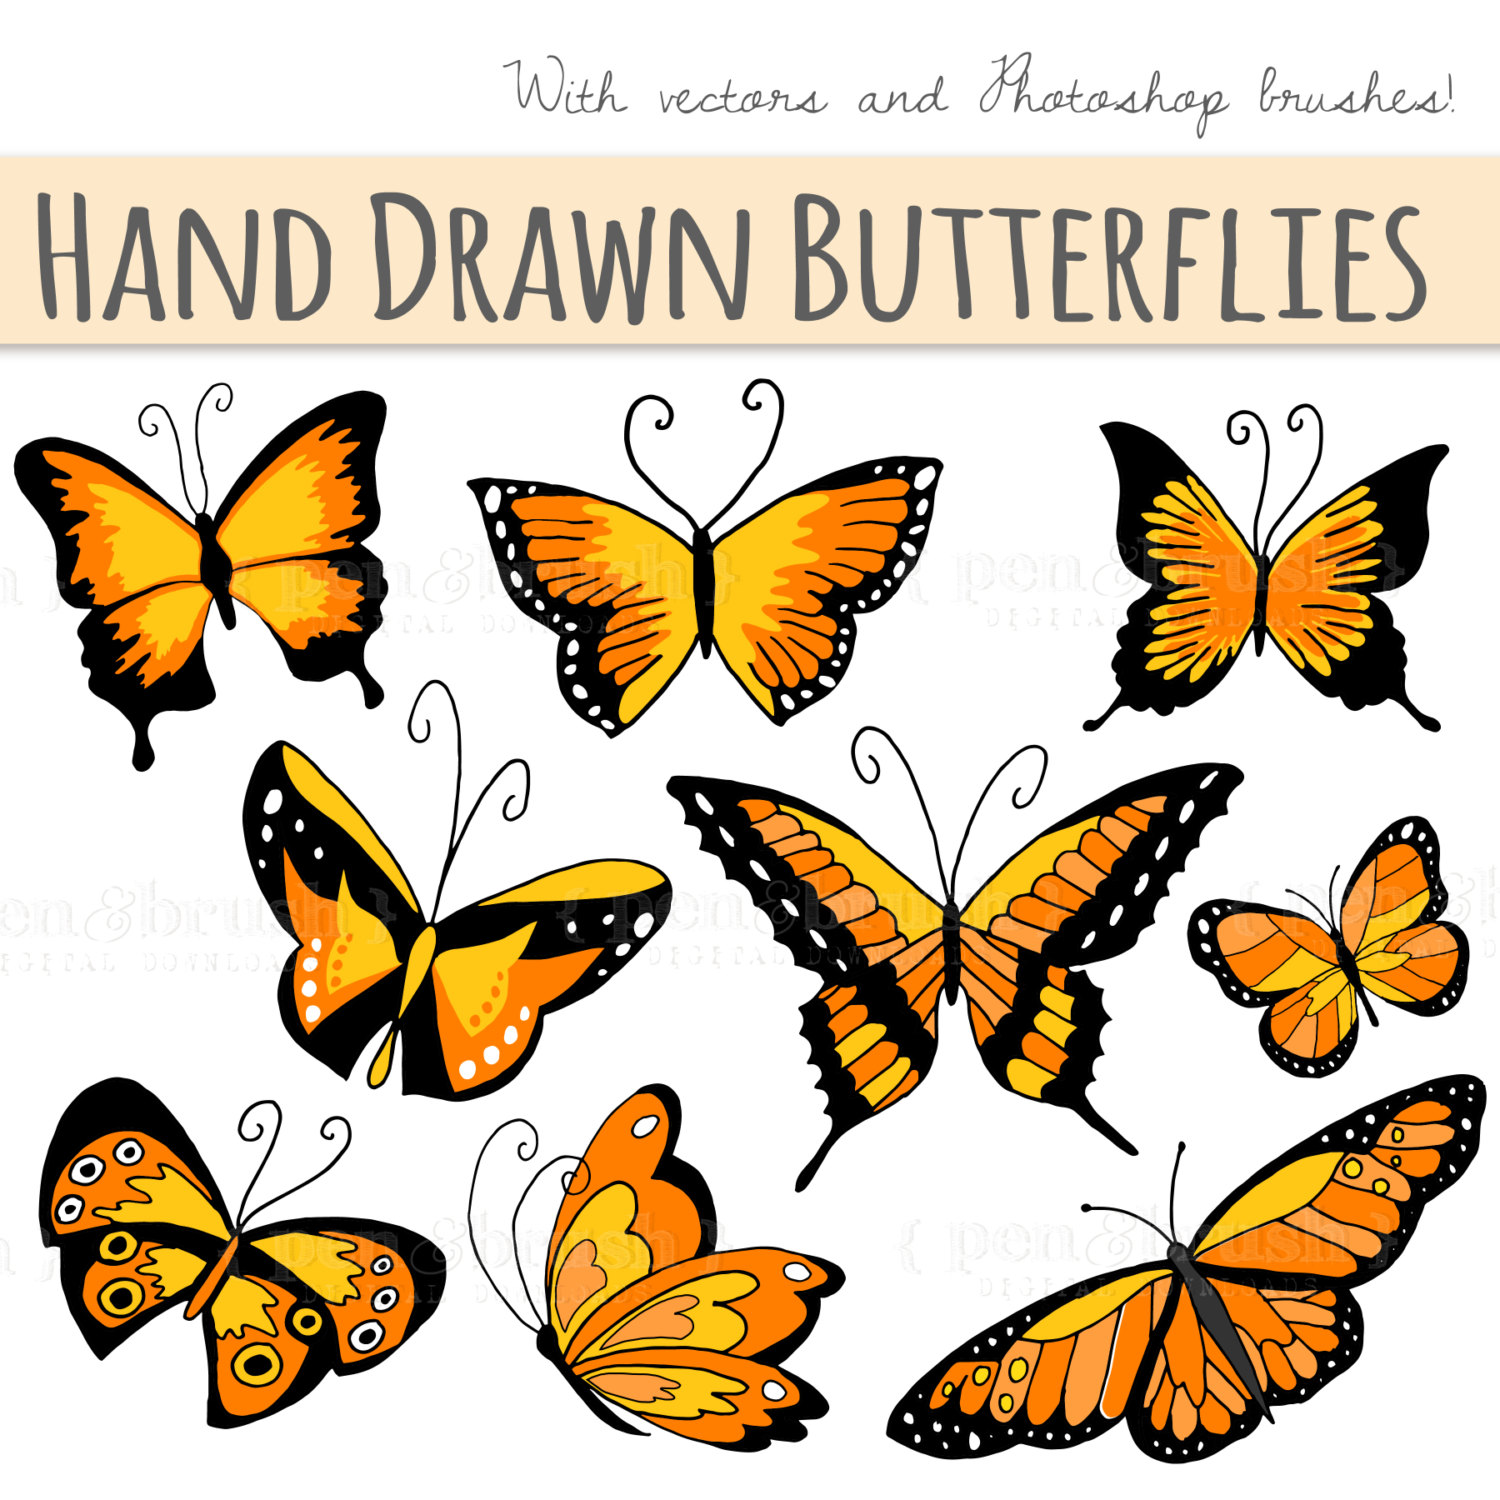 Popular items for hand drawn clip art on Etsy